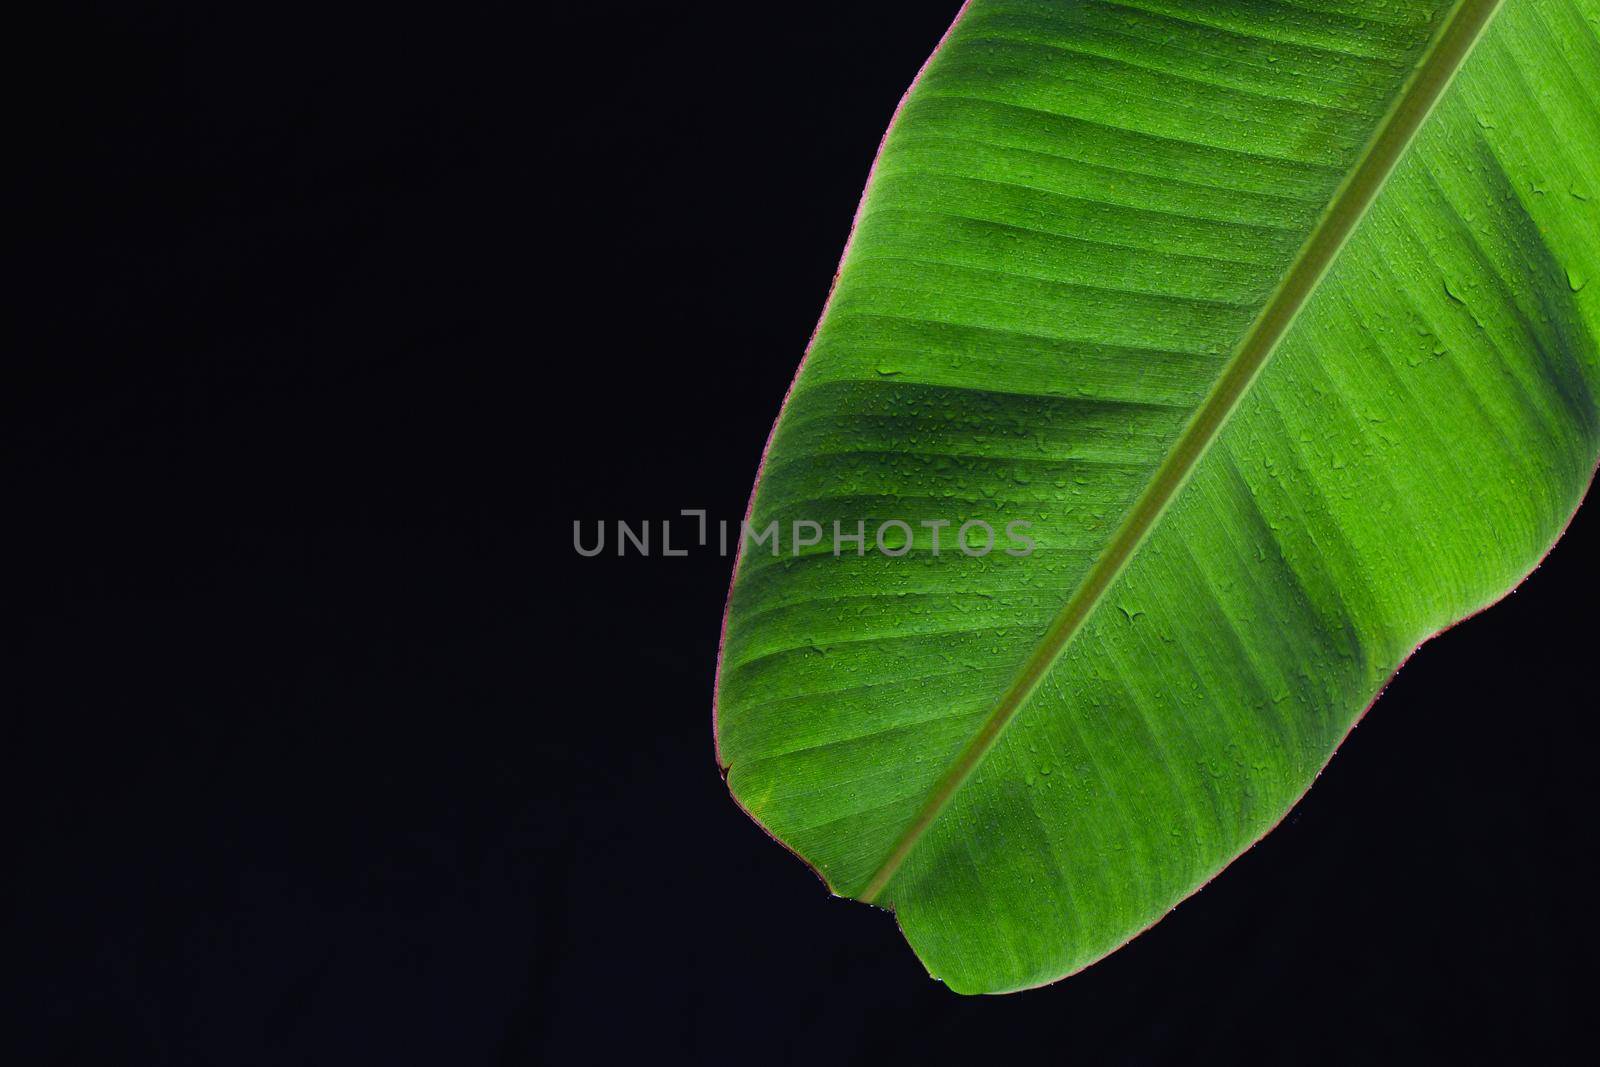 Banana leaf texture with drop shadow on dark background